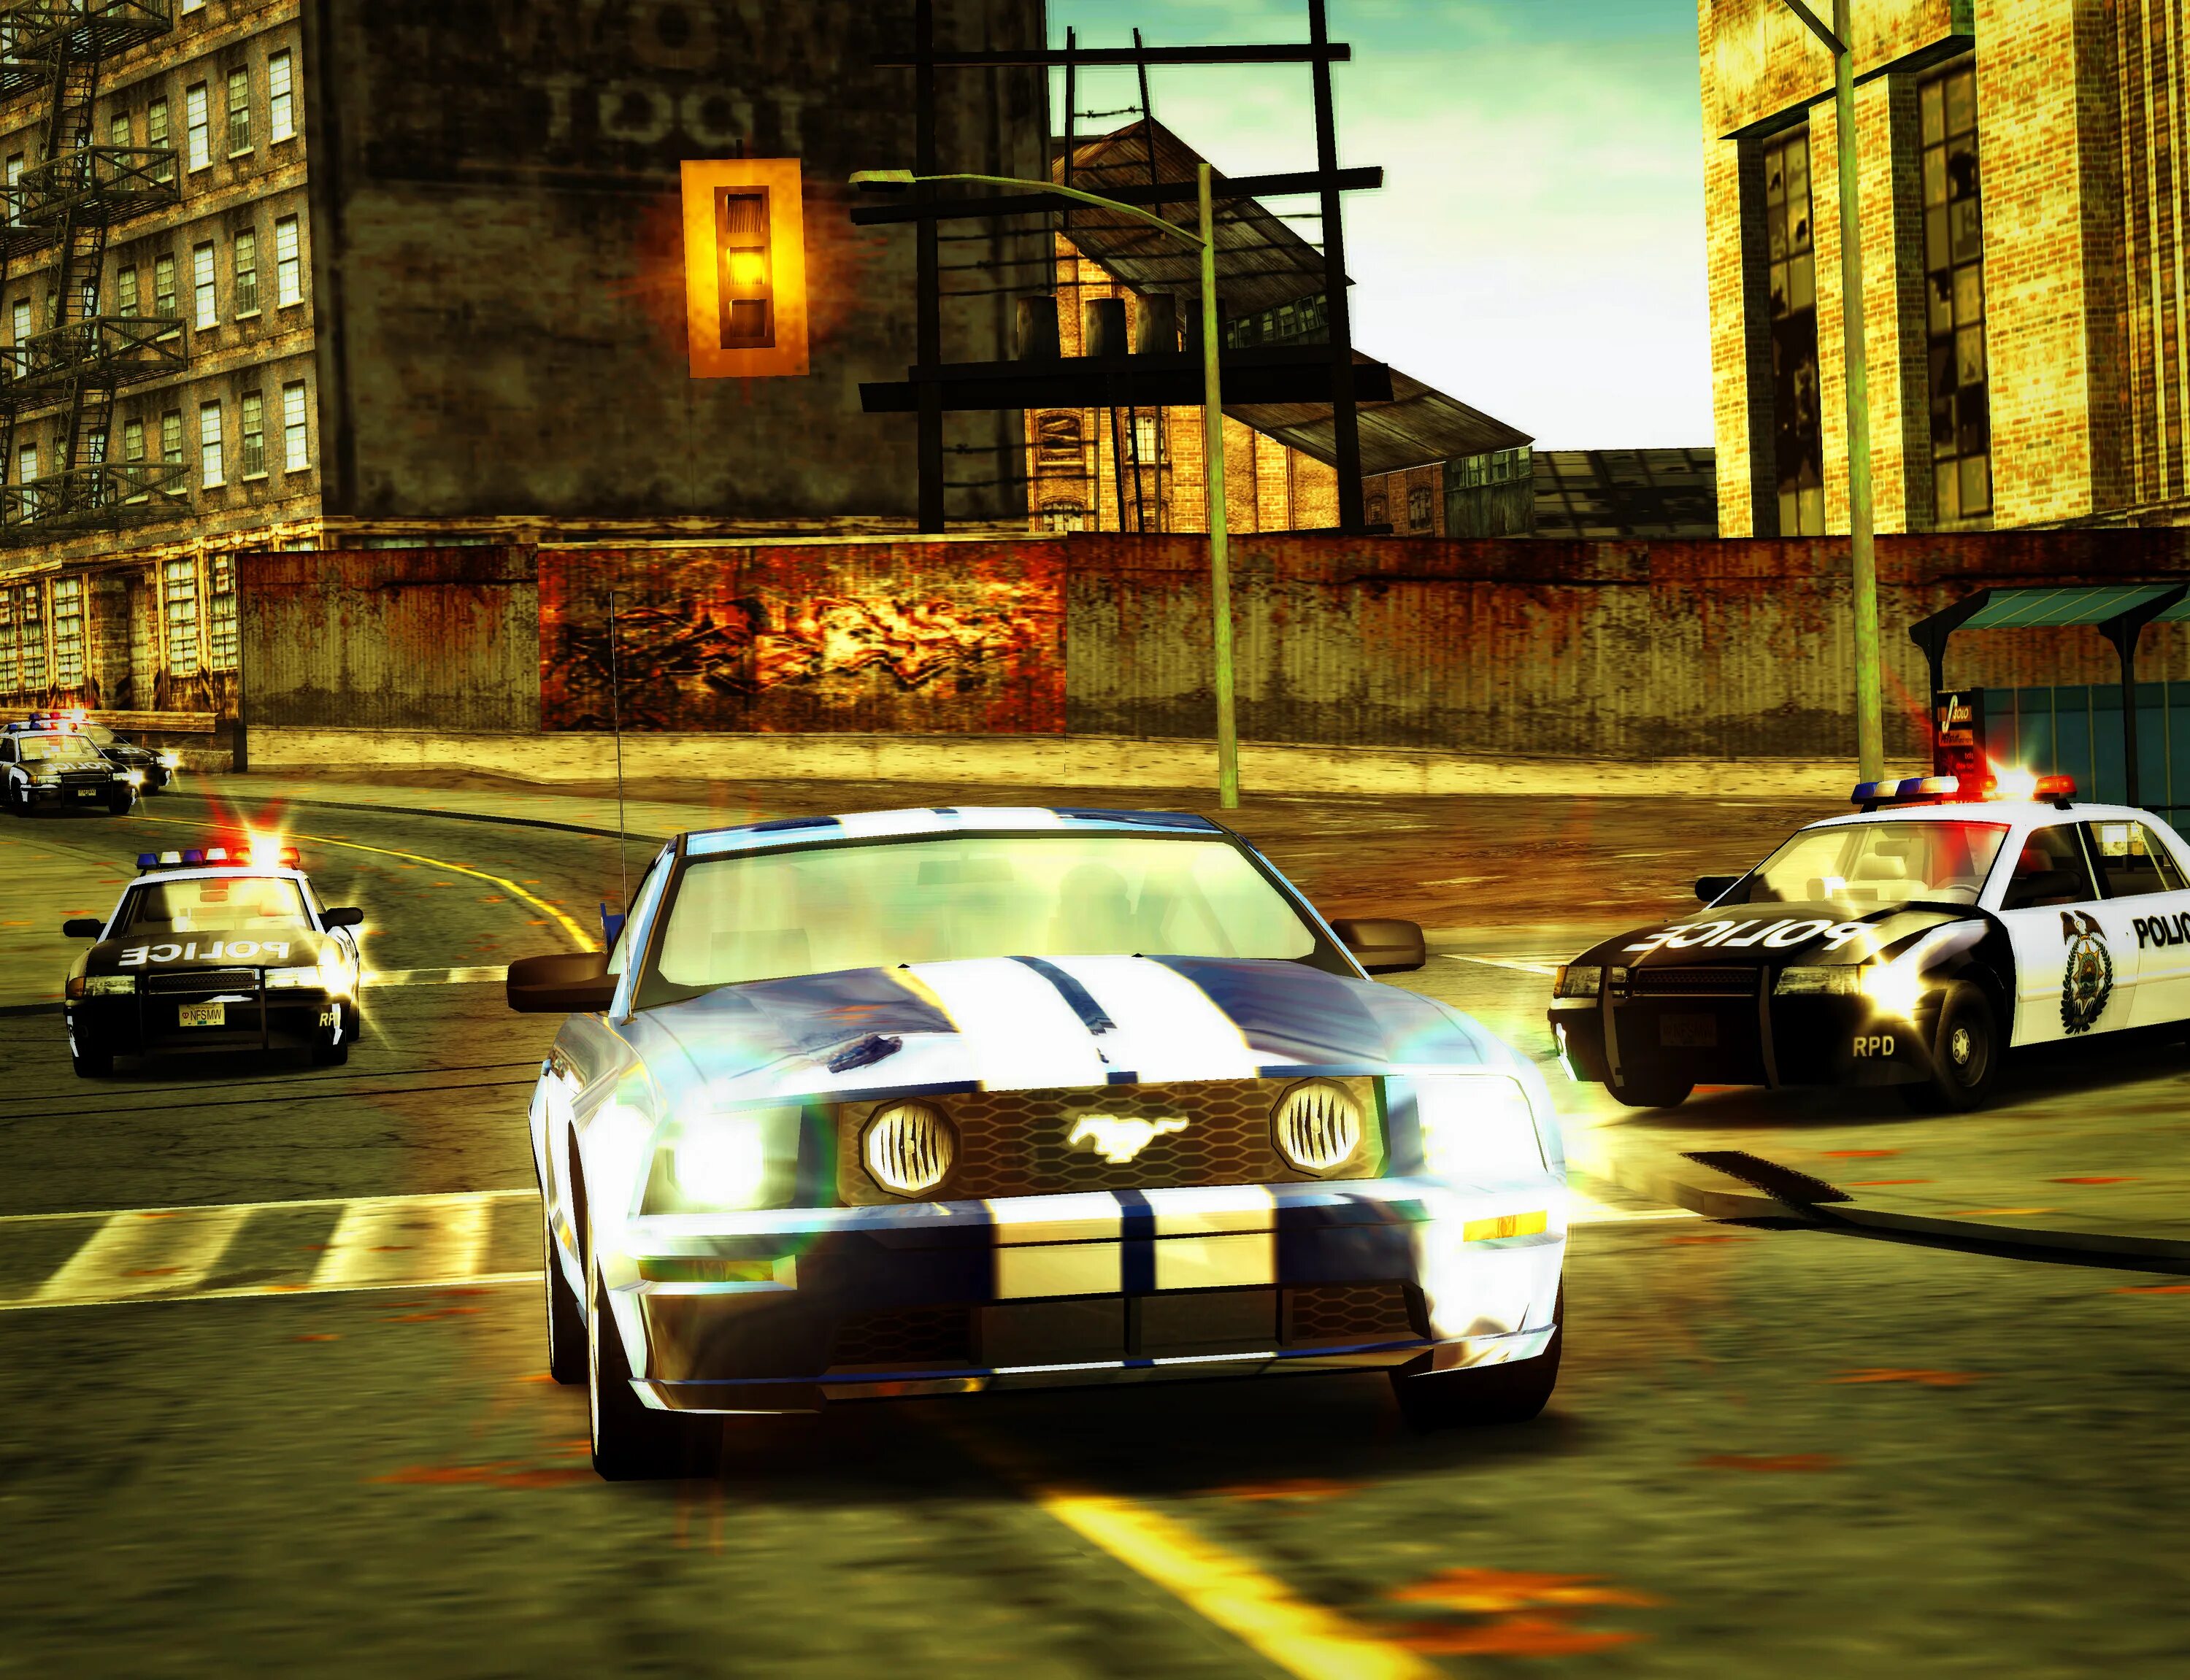 Need for Speed most wanted 2005. Нфс МВ 2005. Гонки NFS most wanted. Гонки NFS most wanted 2005.